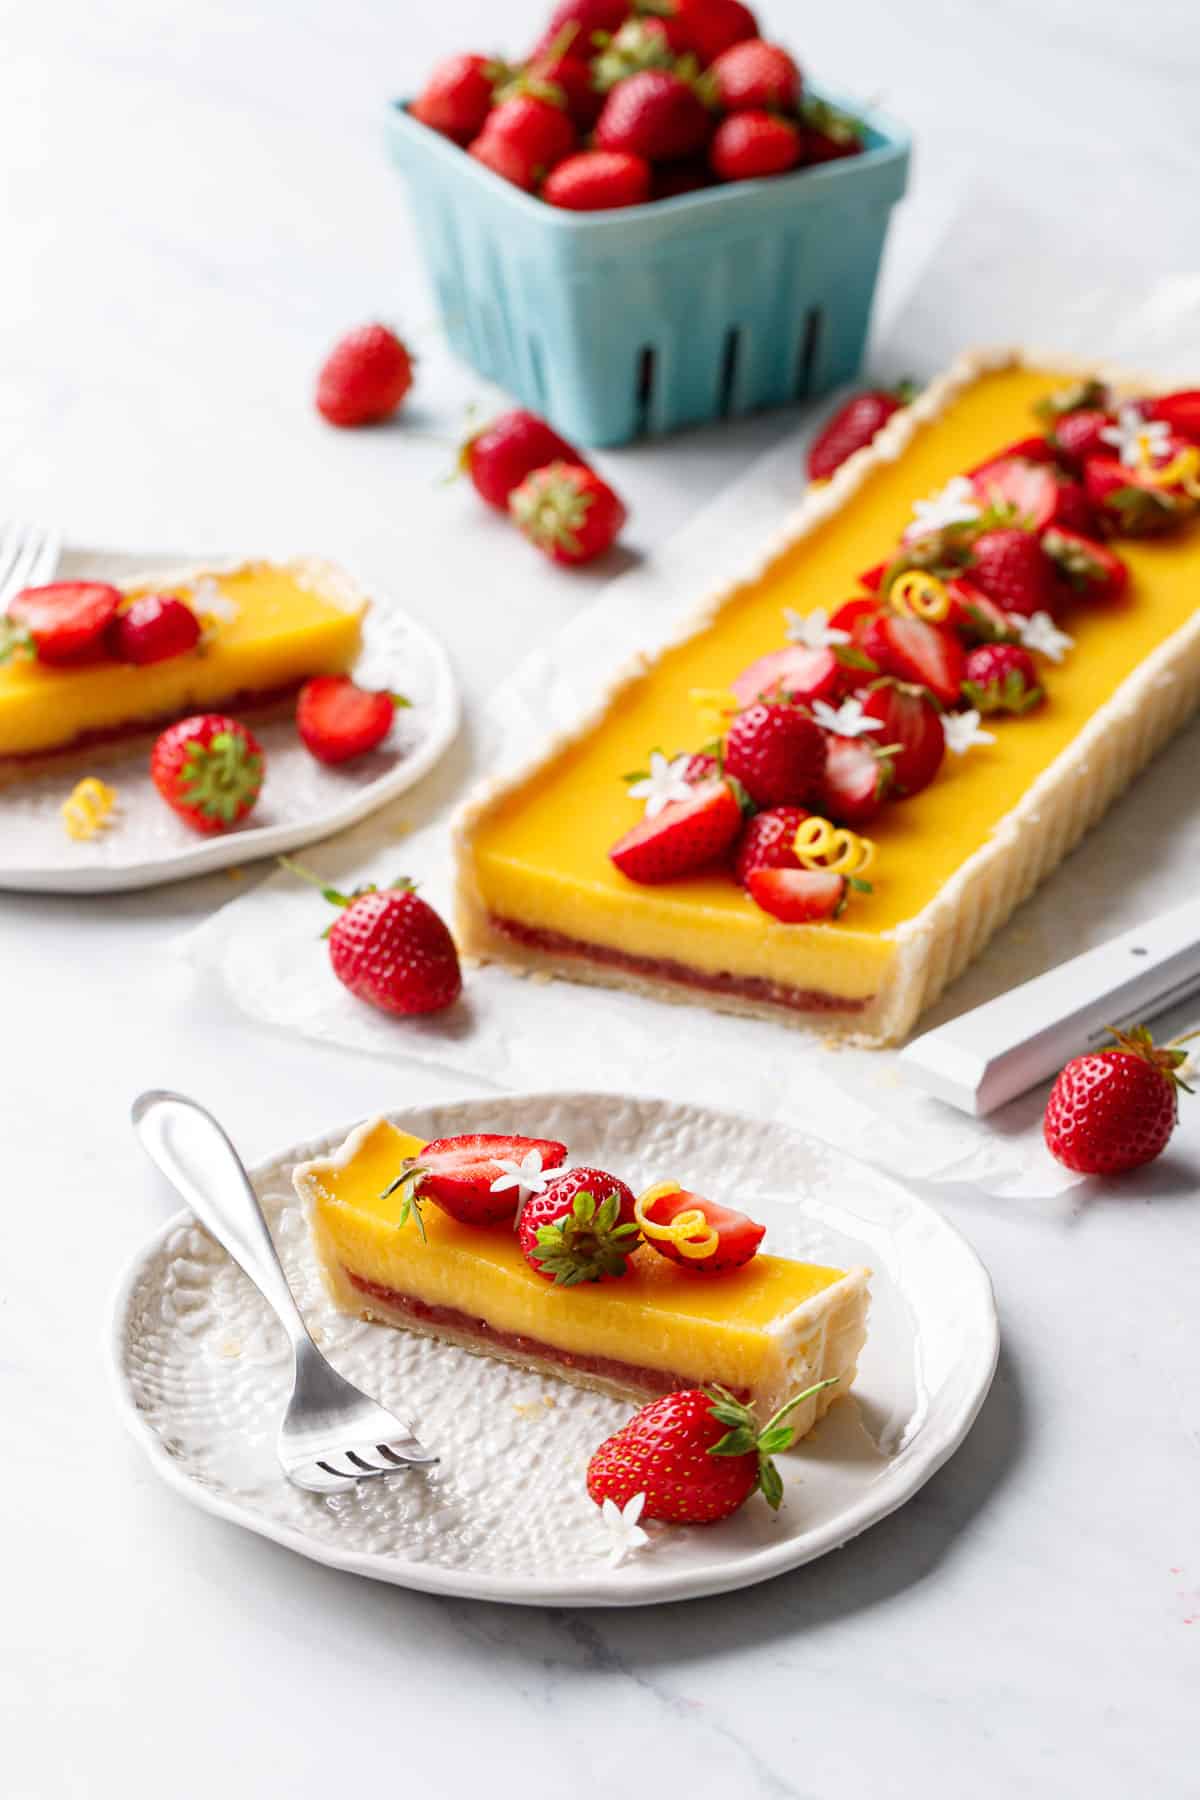 Slice of Strawberry Meyer Lemon Tart on a white plate, garnished with fresh strawberries and white edible flowers.